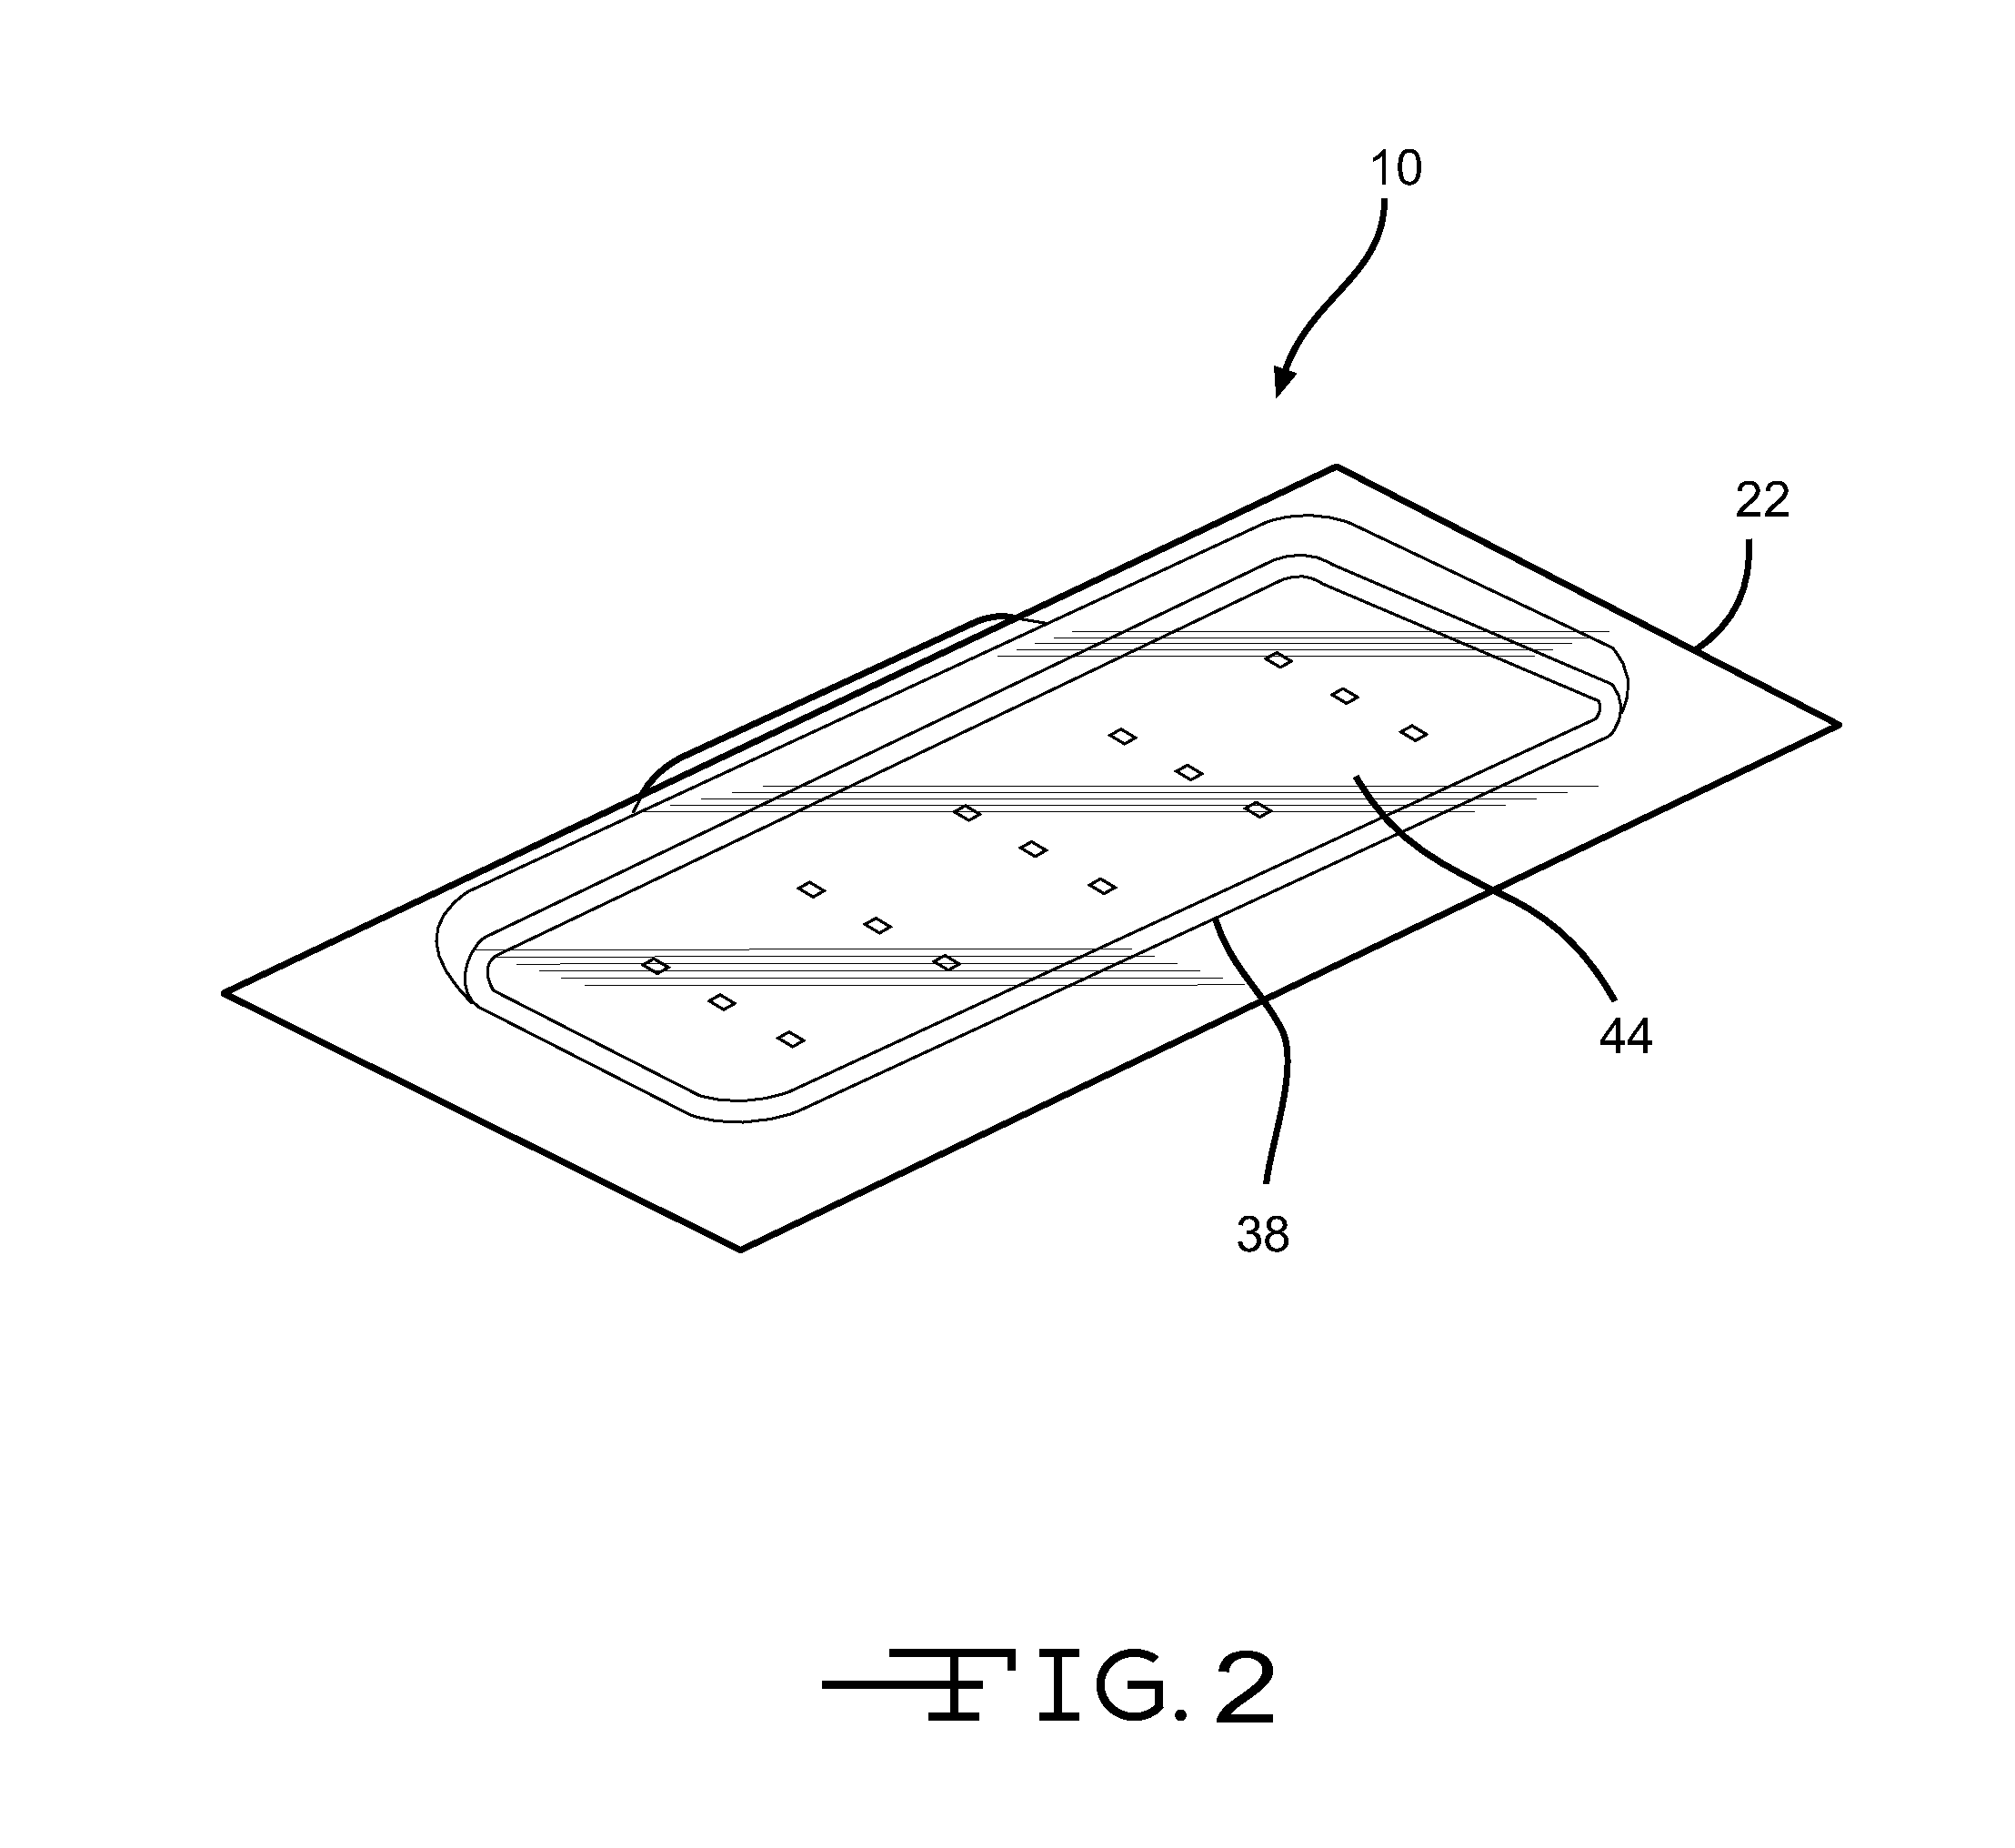 Ultrasonic monitoring device for measuring physiological parameters of a mammal